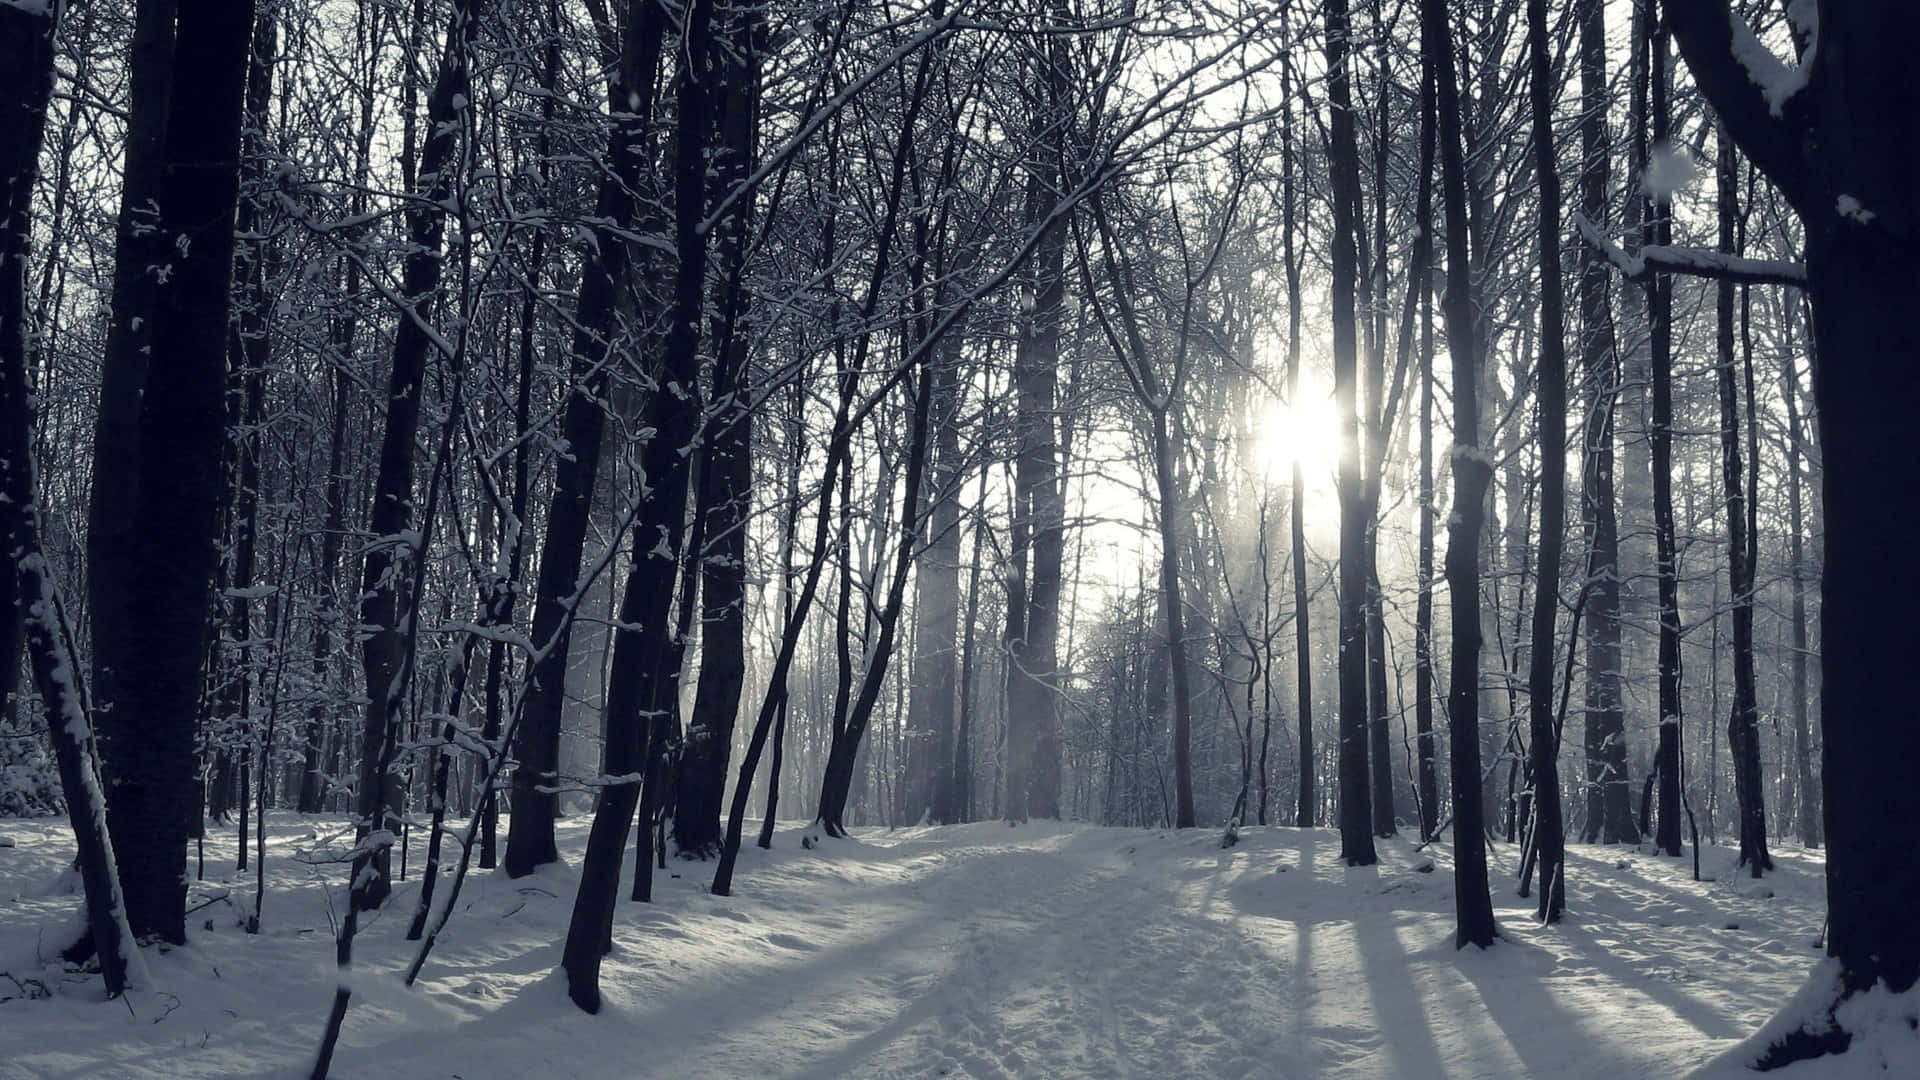 Take in the enchanting beauty of a winter forest